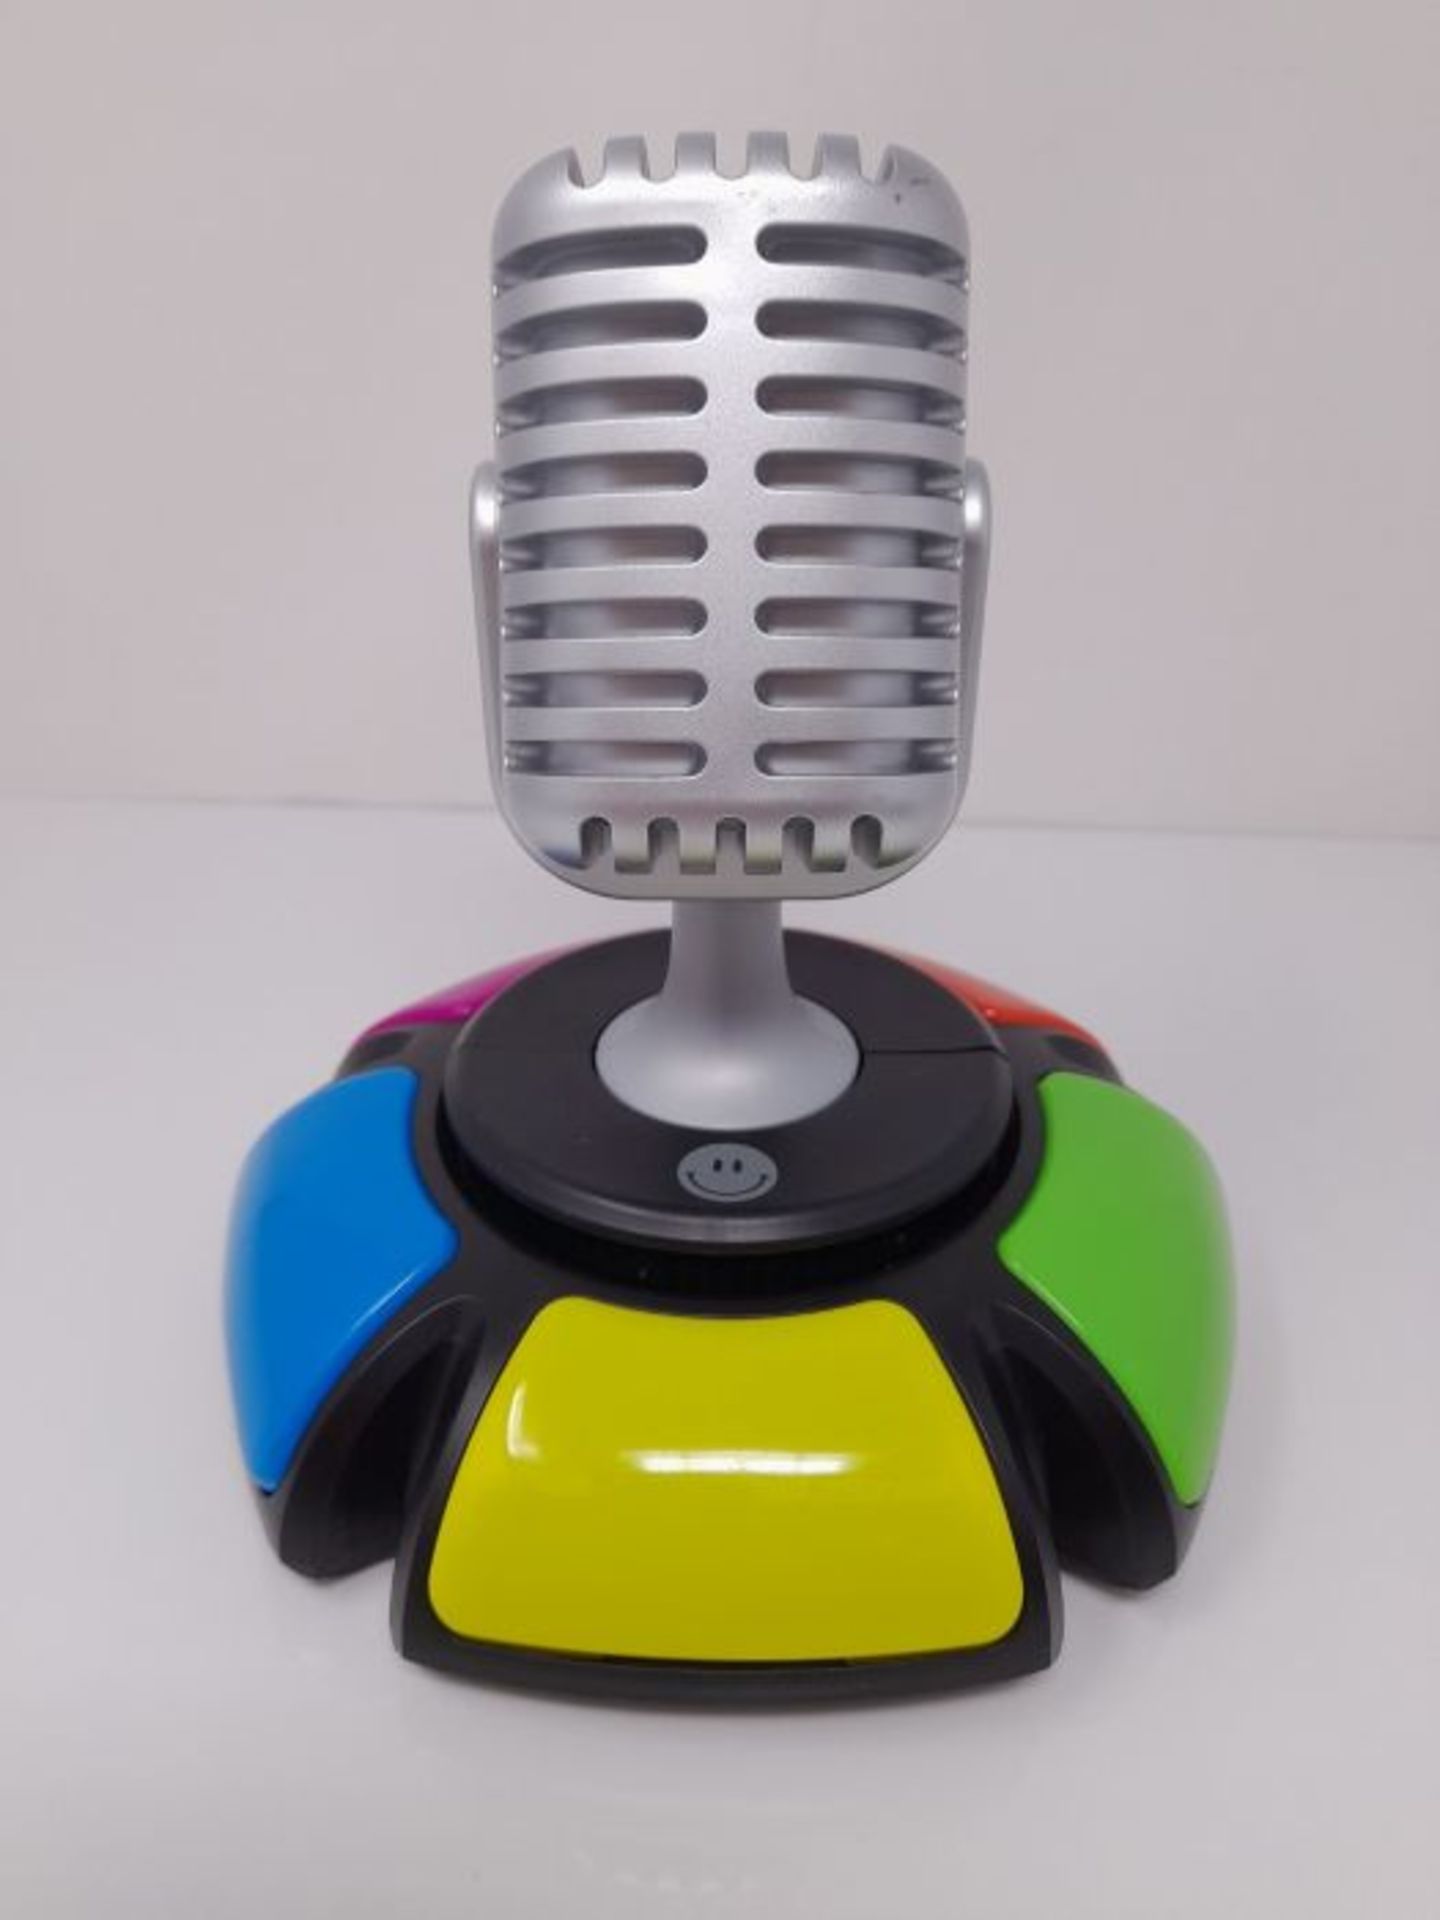 HUTTER Trade 061829 Sound Jack Acoustic Quiz Game, Multi-Colour - Image 2 of 3